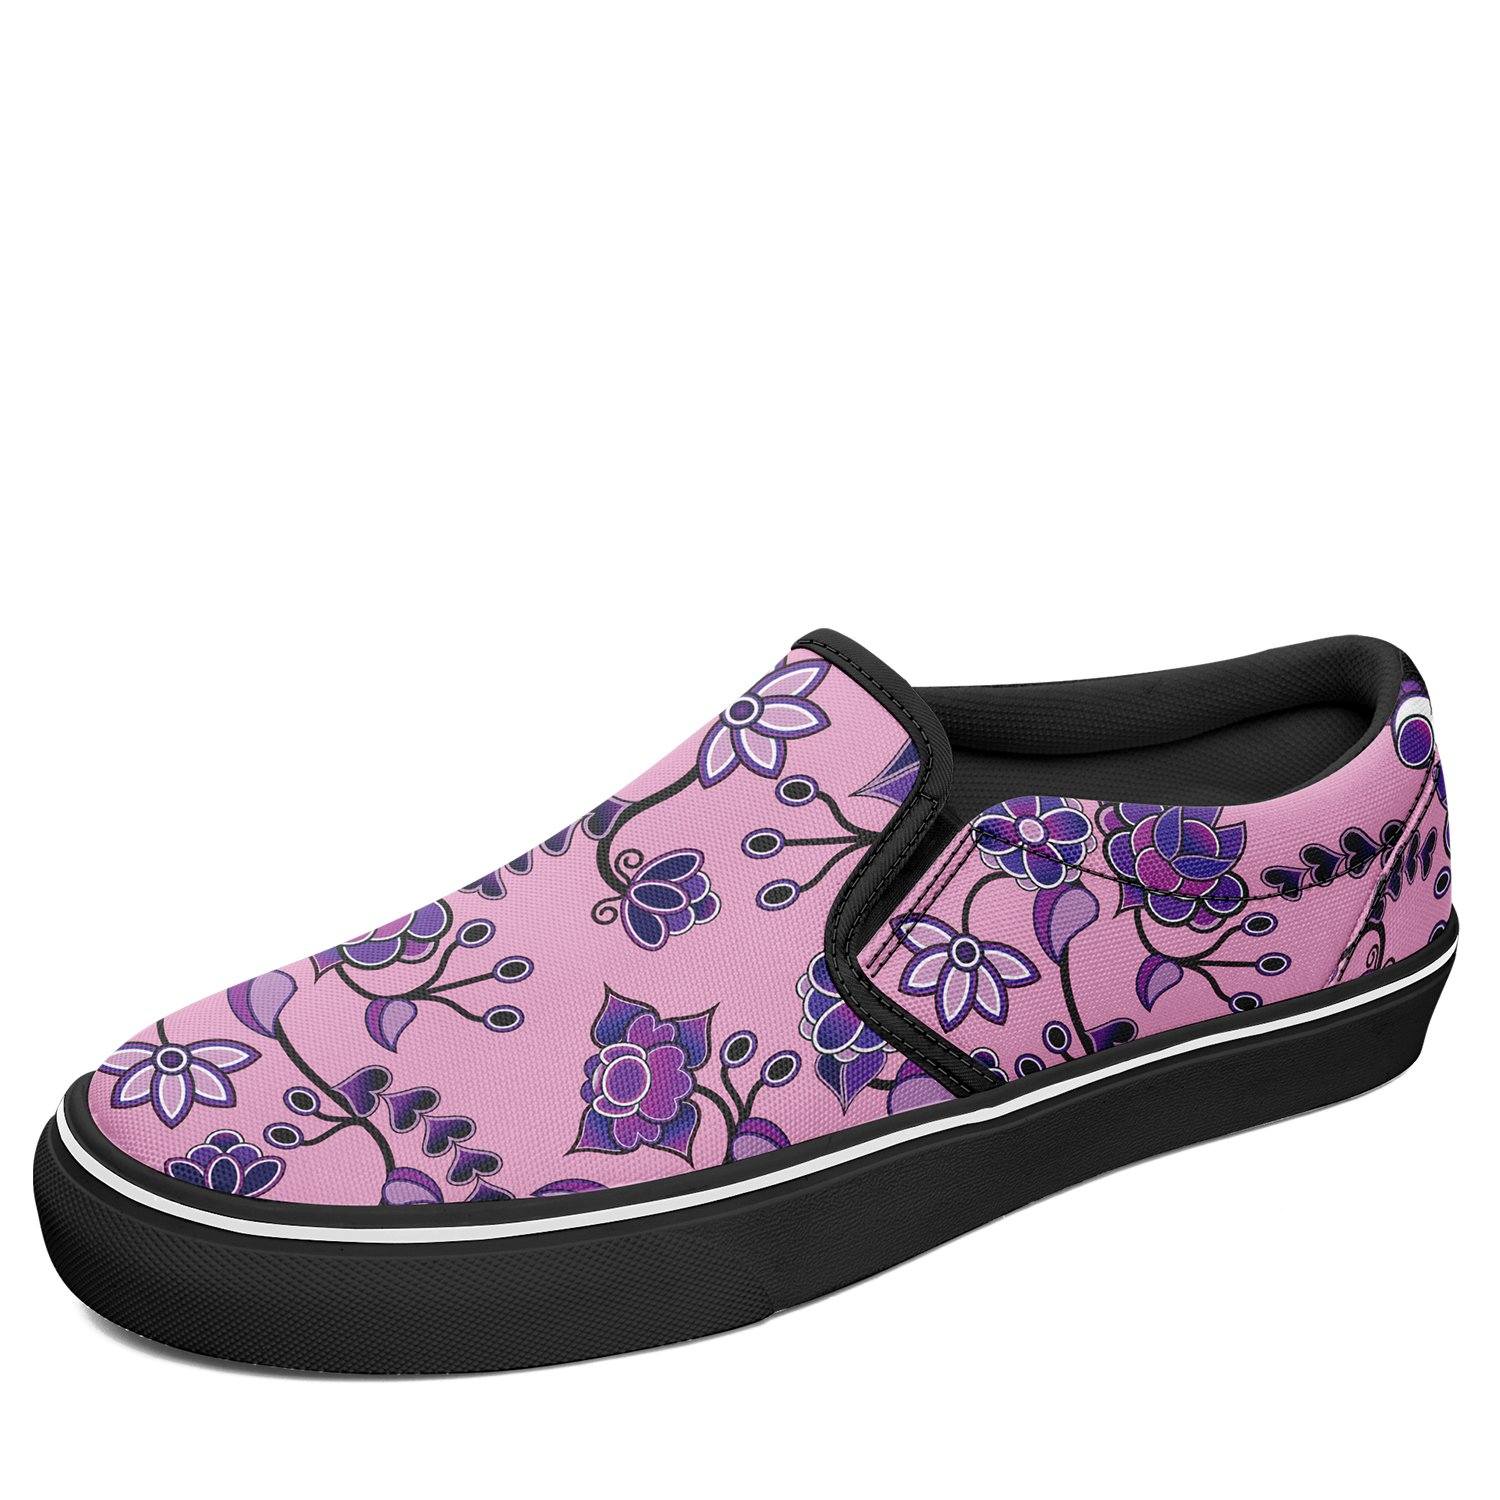 Purple Floral Amour Otoyimm Canvas Slip On Shoes otoyimm Herman US Youth 1 / EUR 32 Black Sole 